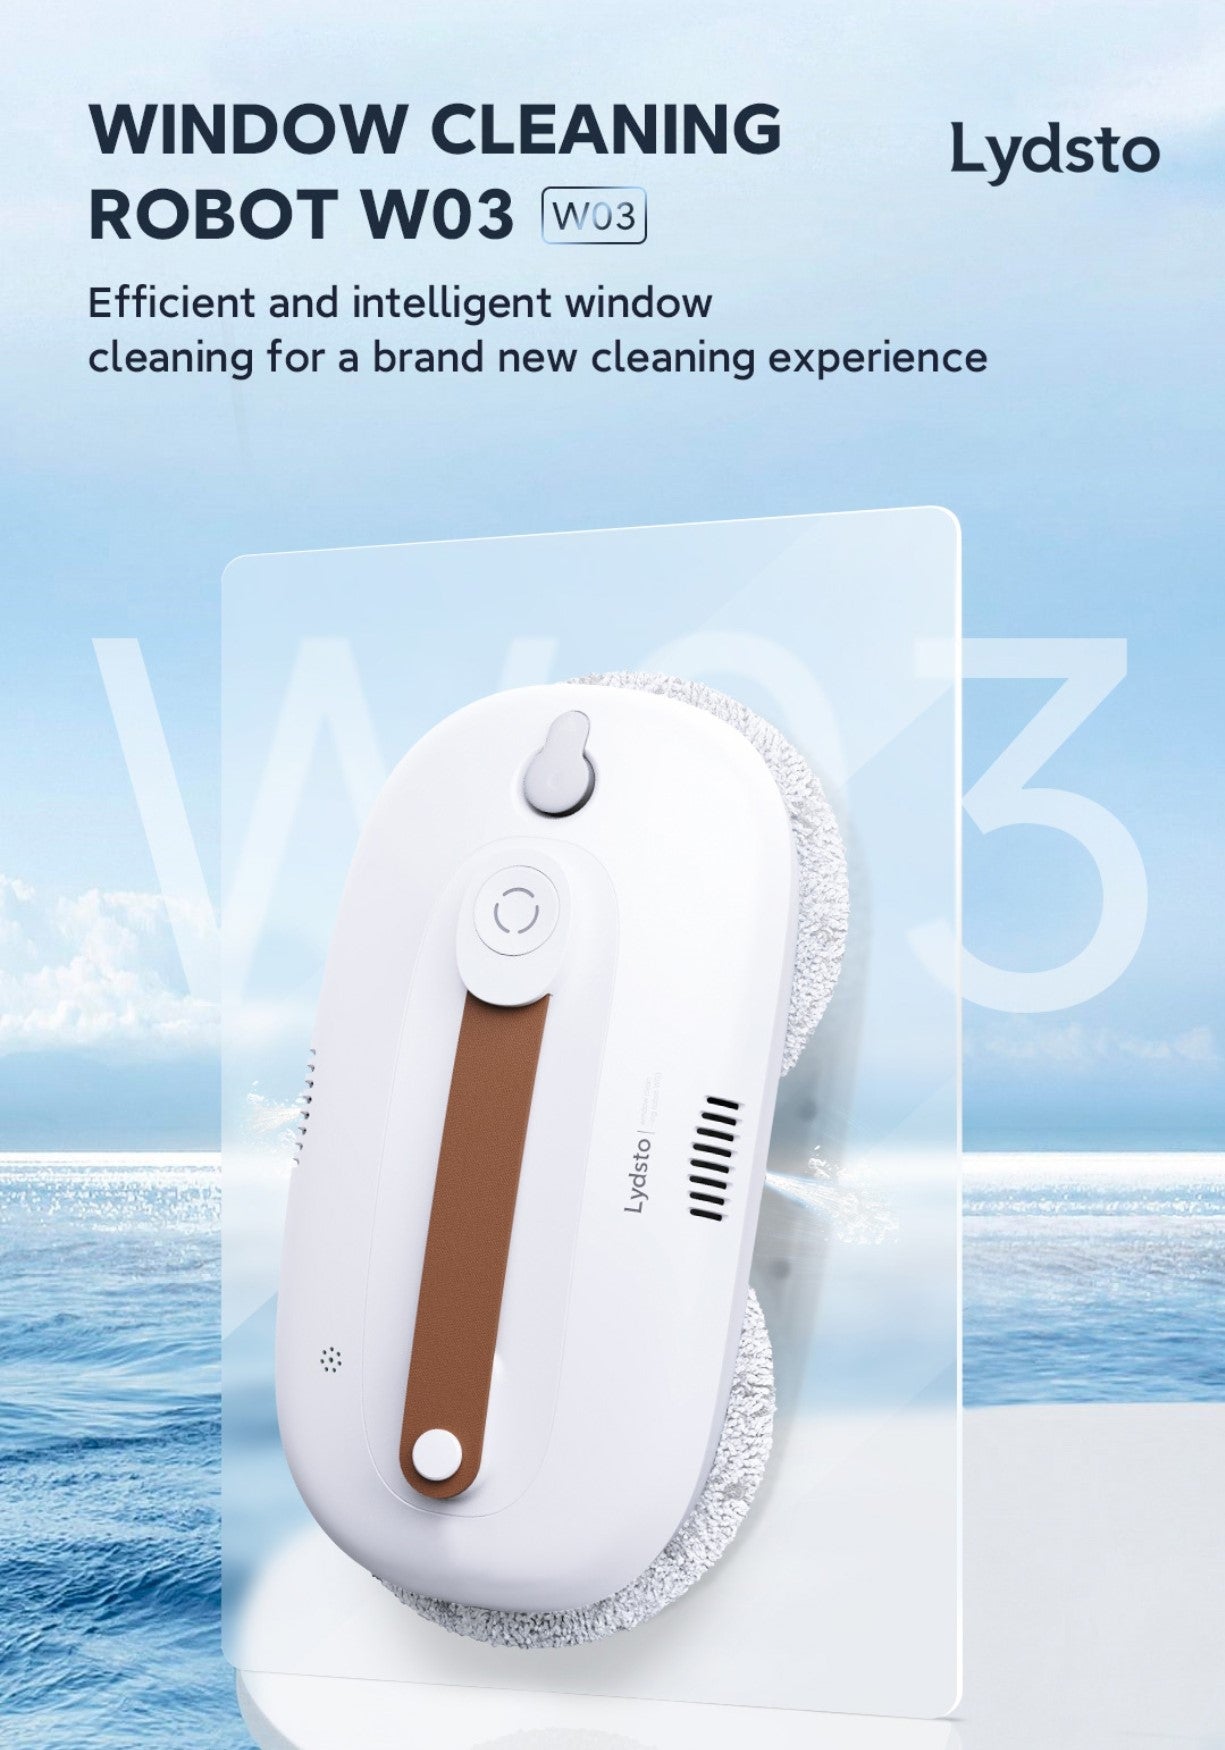 Lydsto Window Cleaning Robot W03 Efficient and intelligent window cleaning for a brand new cleaning experience